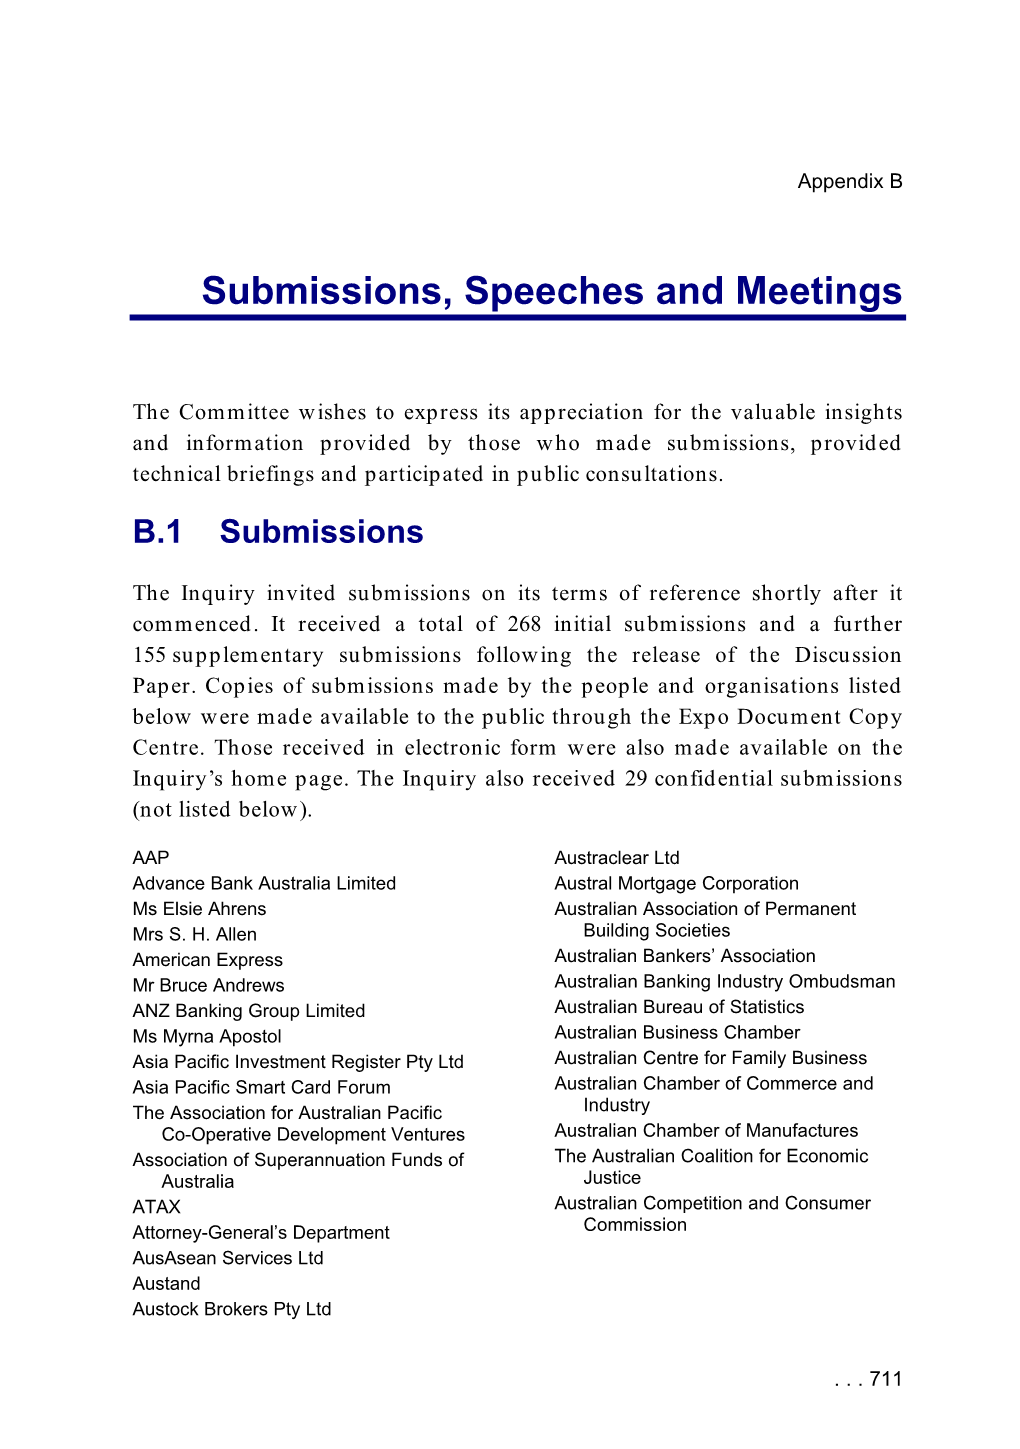 Appendix B – Submissions, Speeches and Meetings